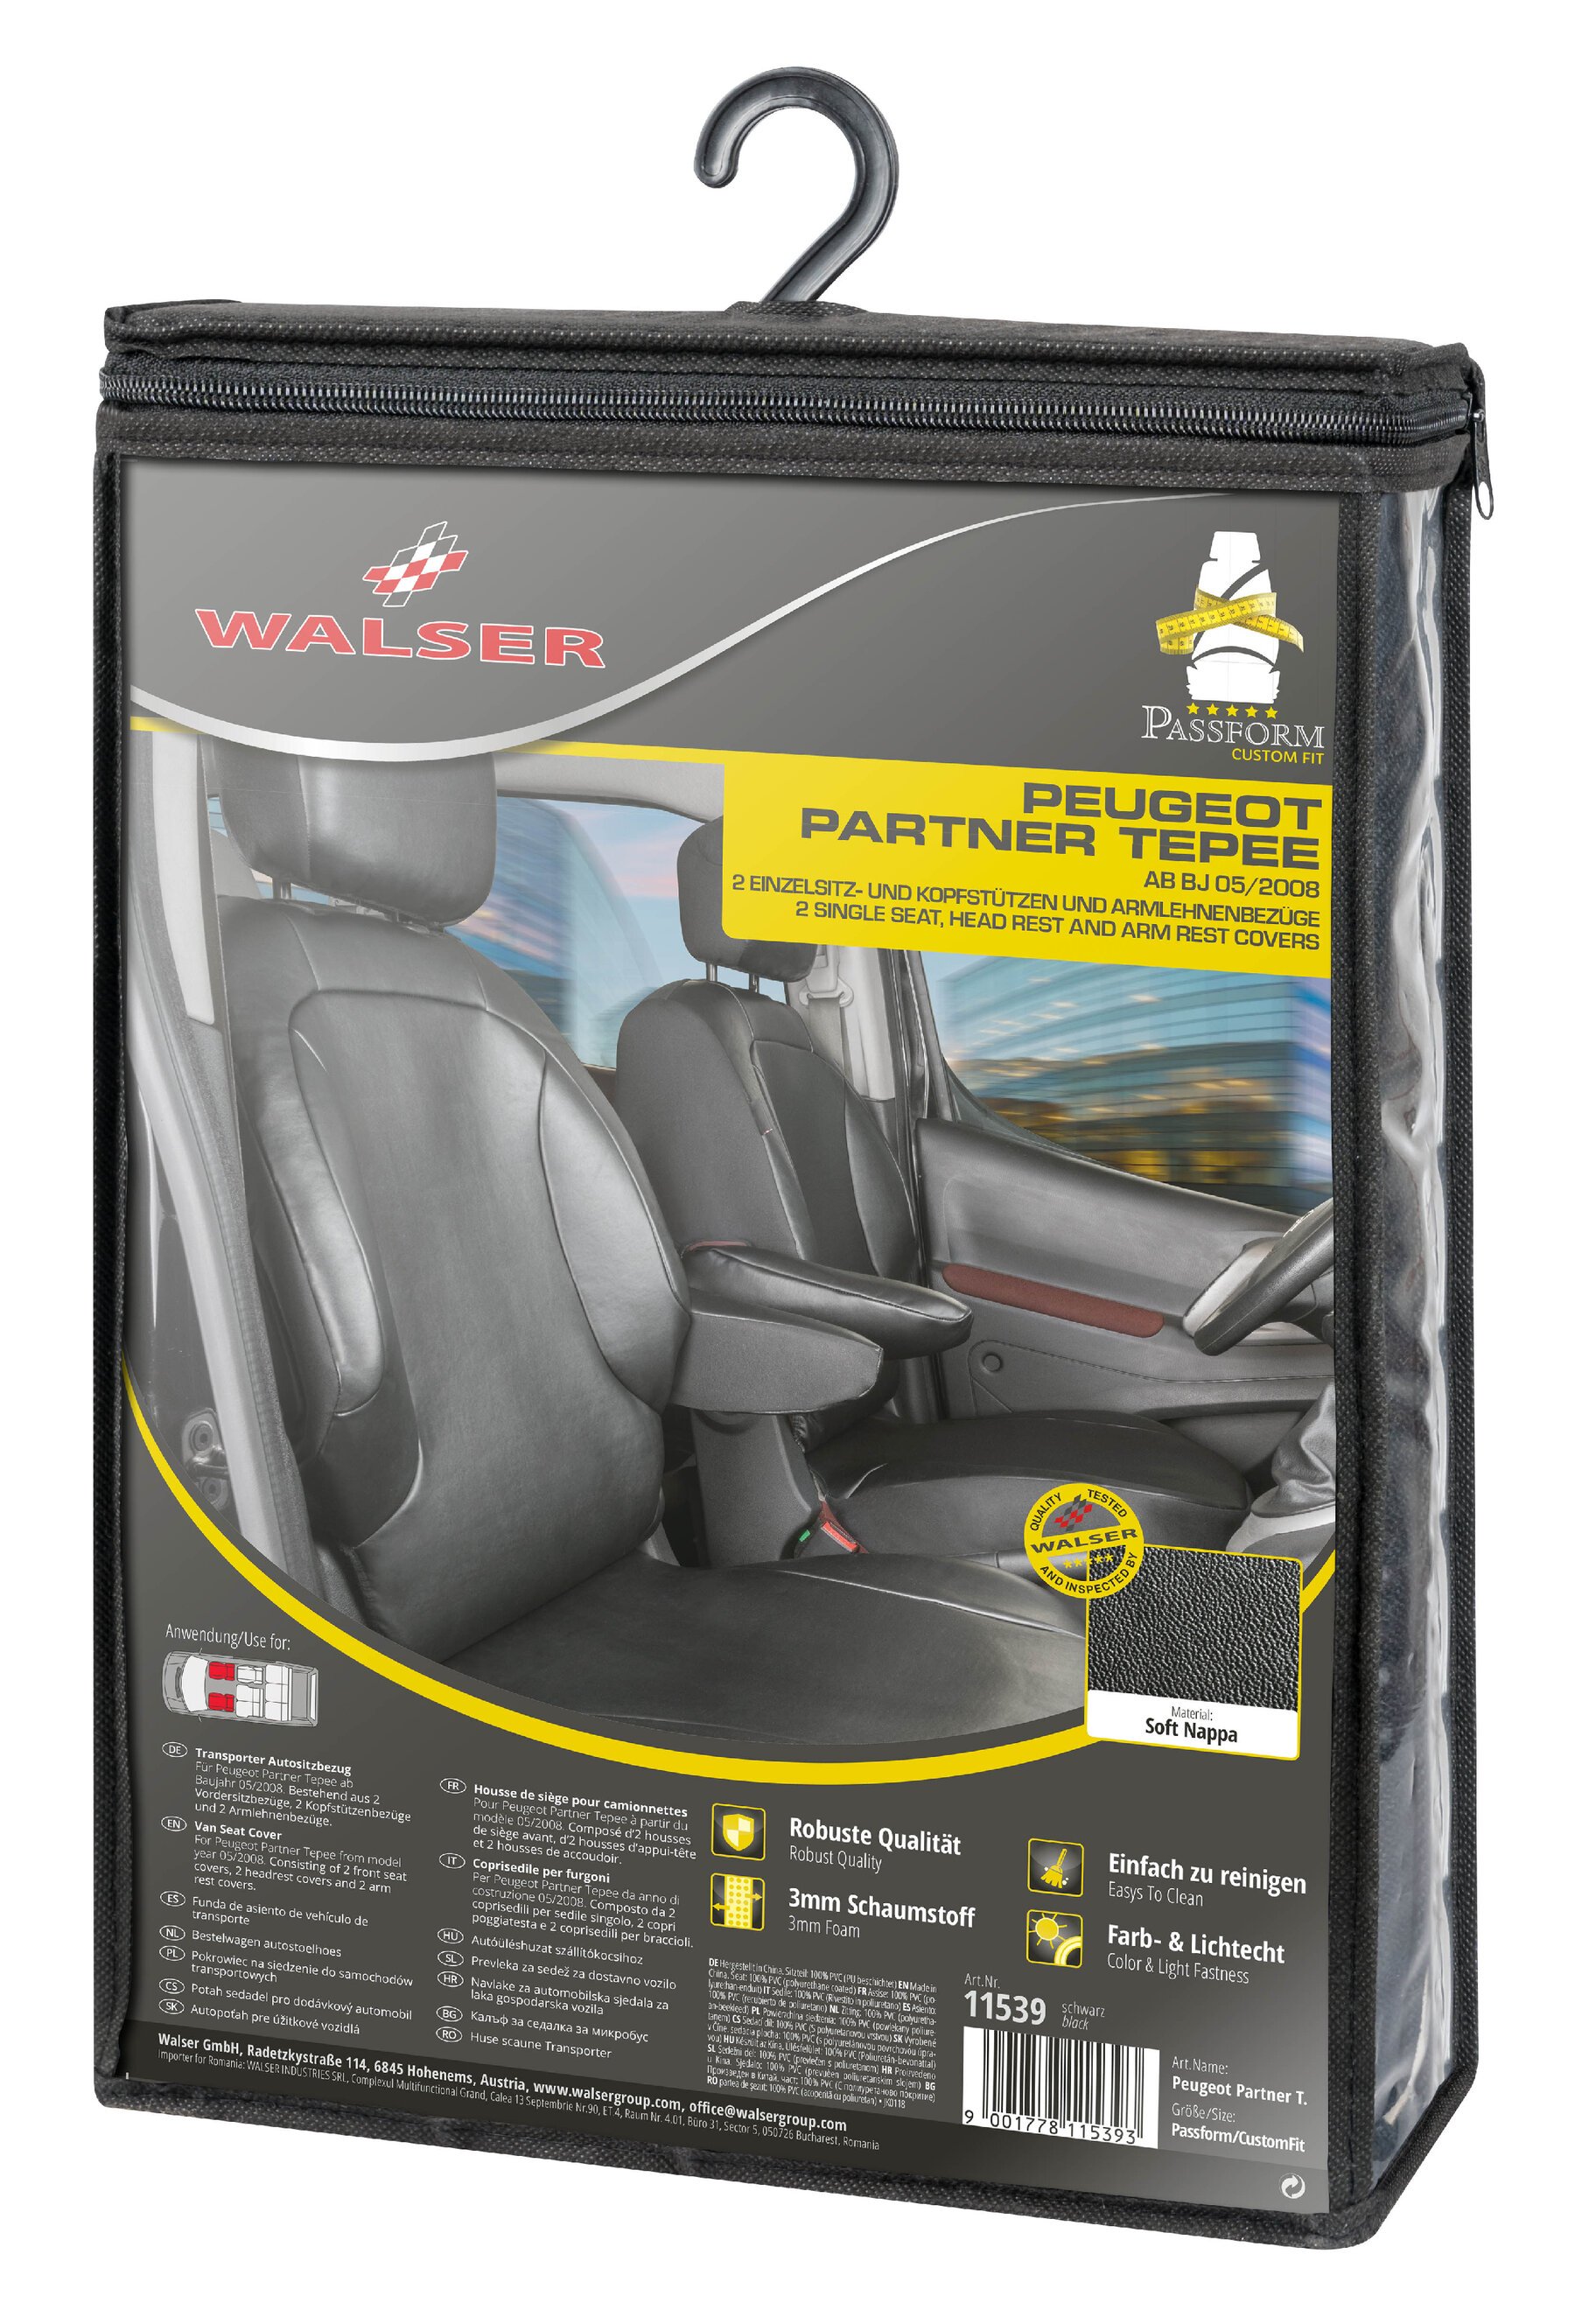 Car Seat cover Transporter made of imitation leather for Peugeot Partner, 2 single seats front